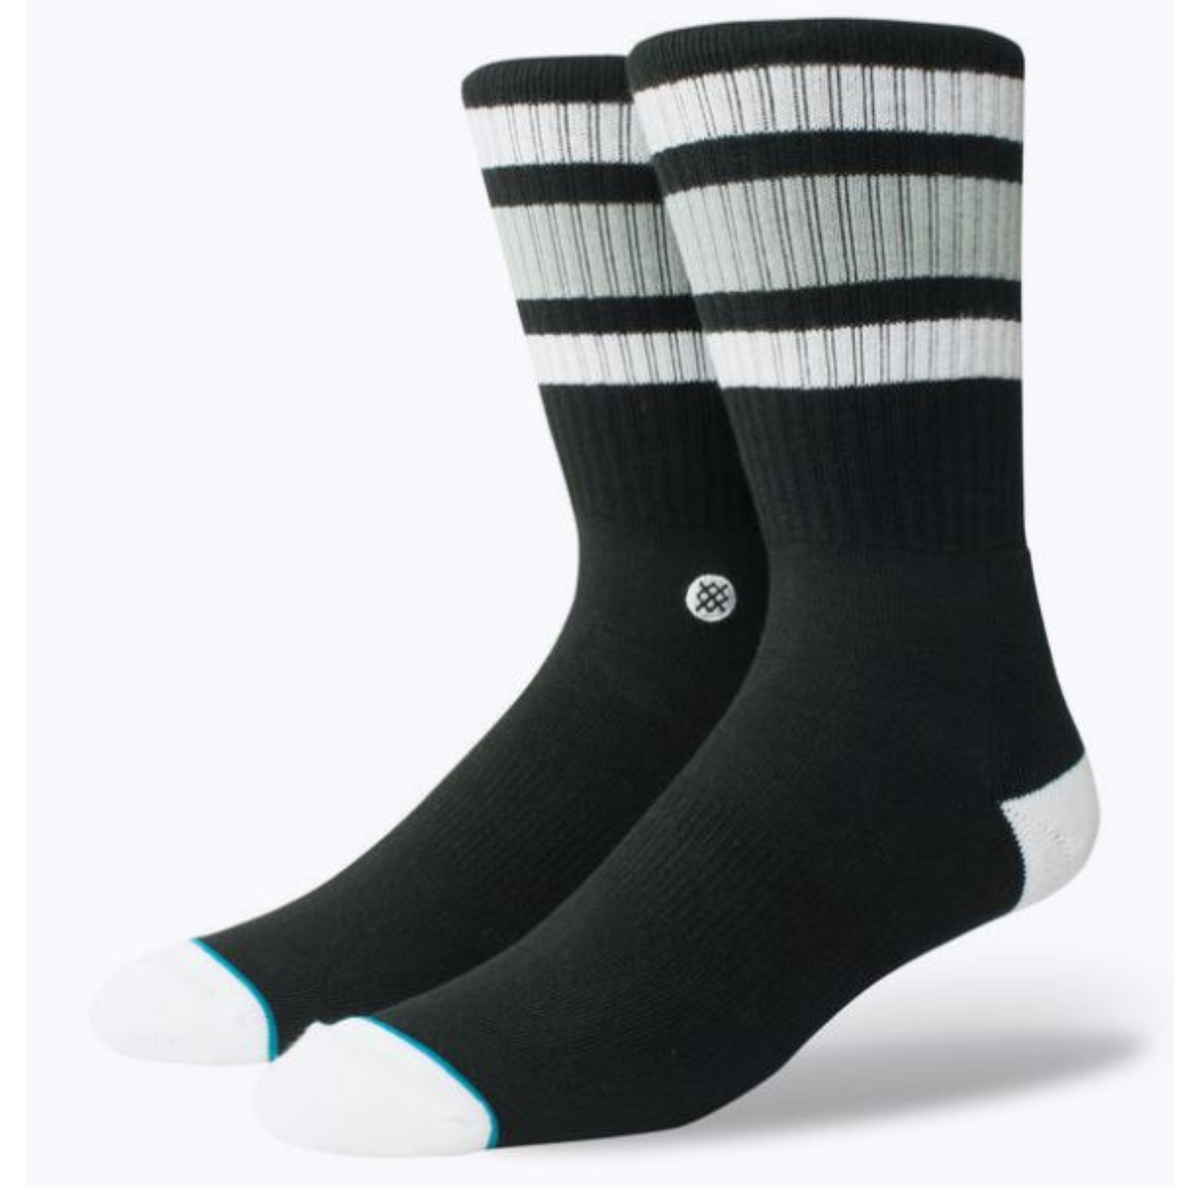 Stance Boyd crew height men&#39;s sock featuring black sock with white toe and heel and gray and white stripes at top. Socks shown on display feet. 